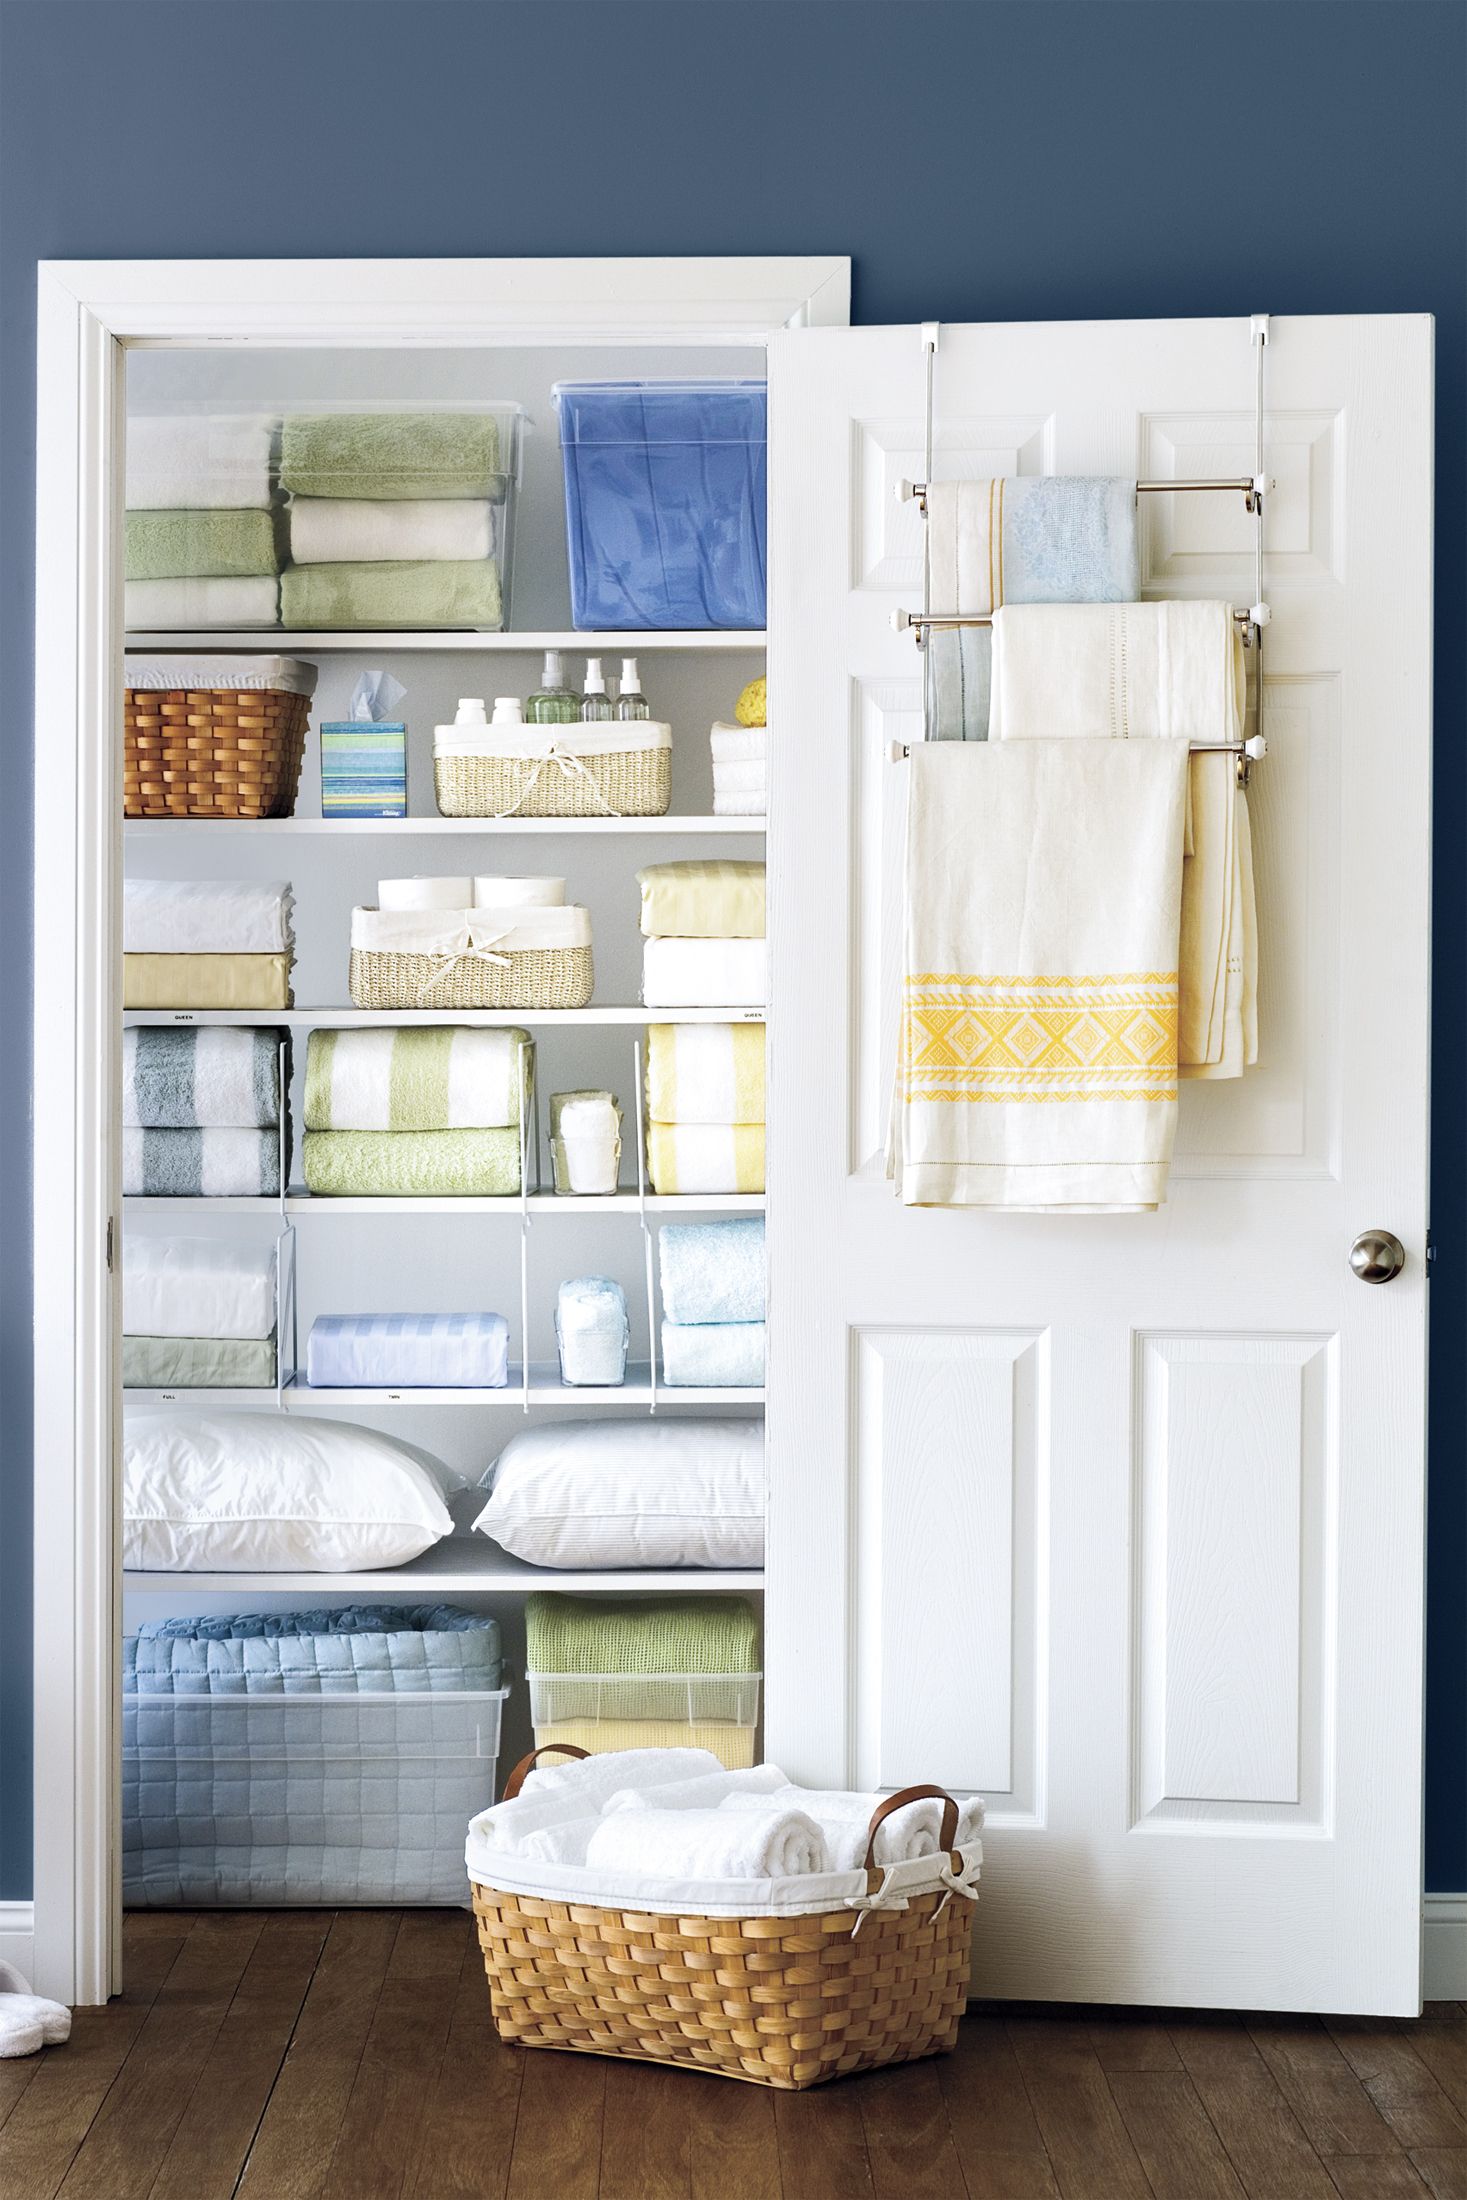 10 Home Organization Hacks to Make Your Space Feel Relaxed